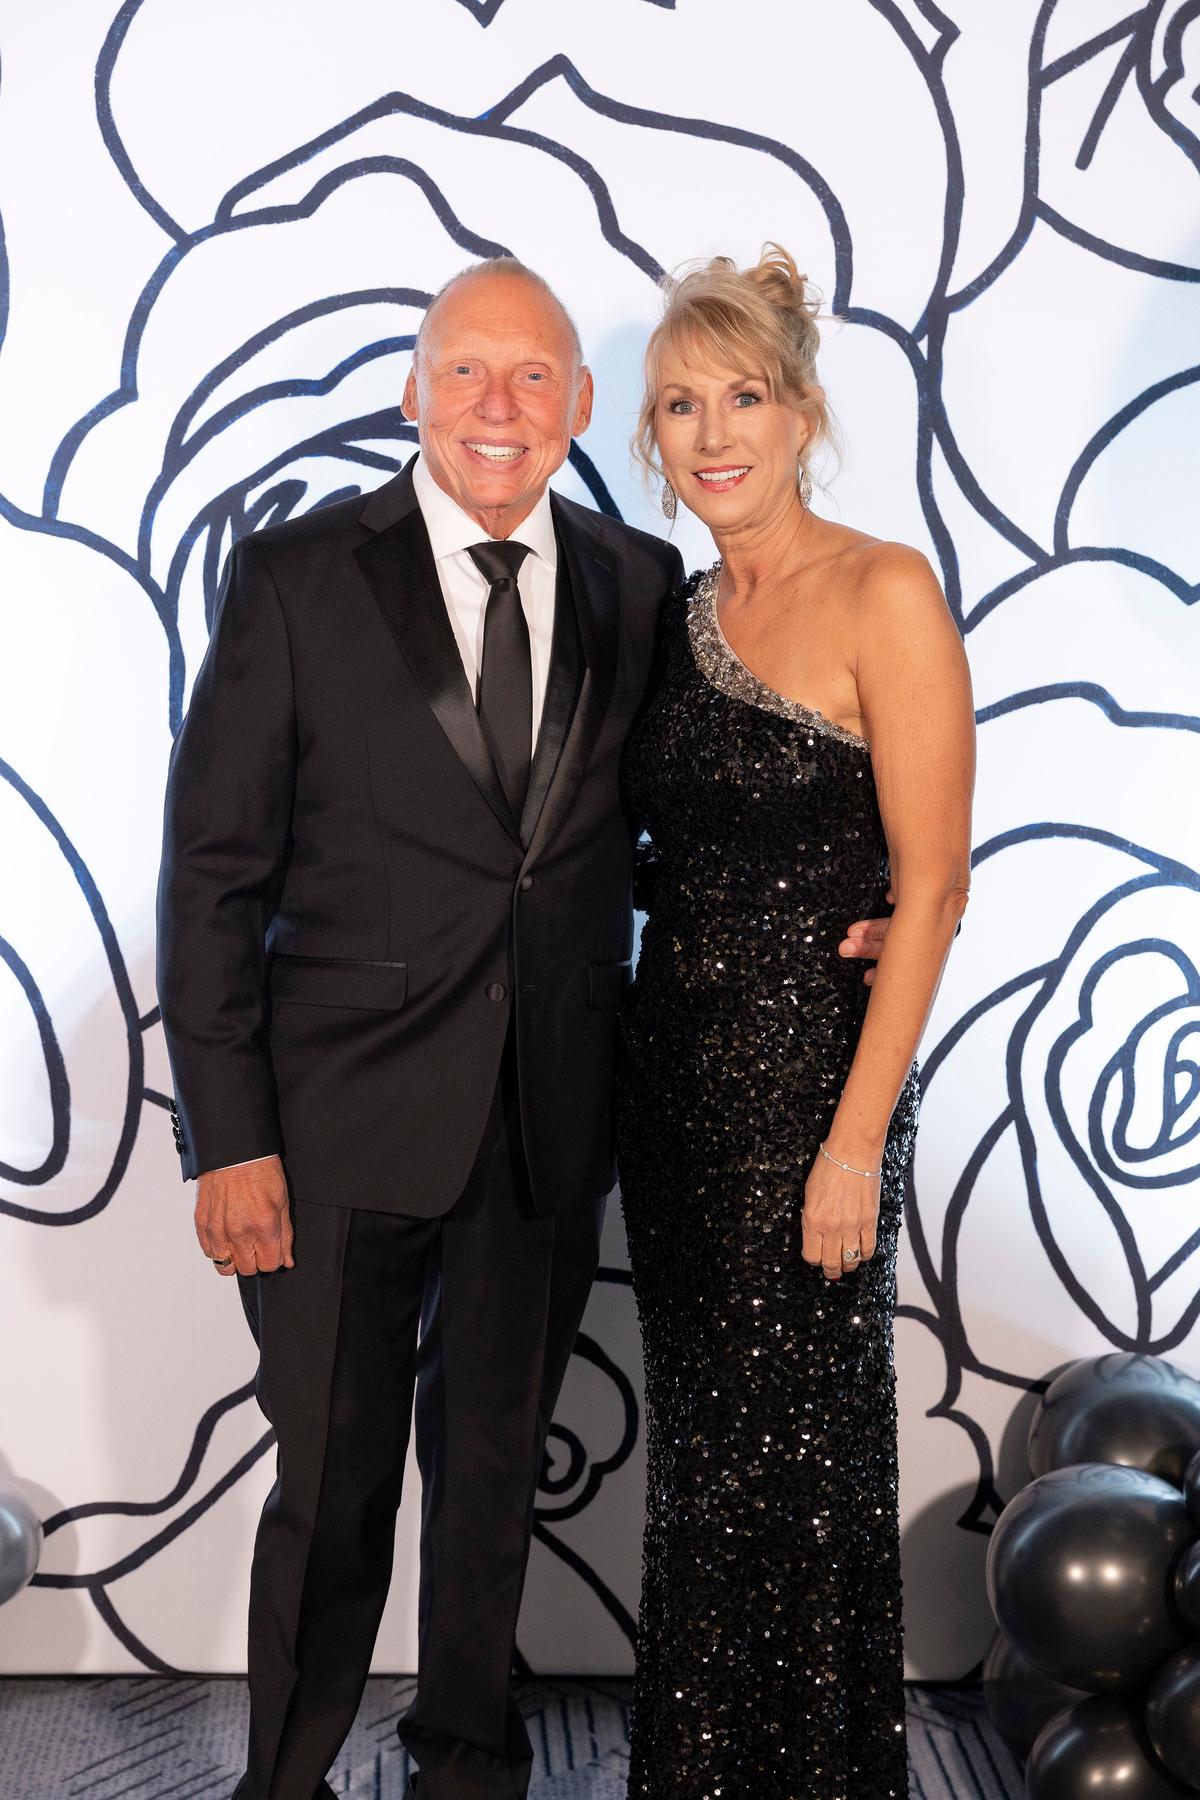 Dr. Hall and her husband at MeSquared Cancer Foundation Black and White Gala in Southlake, Texas. (Courtesy of Mike Lewis Photography via Robin Hall)